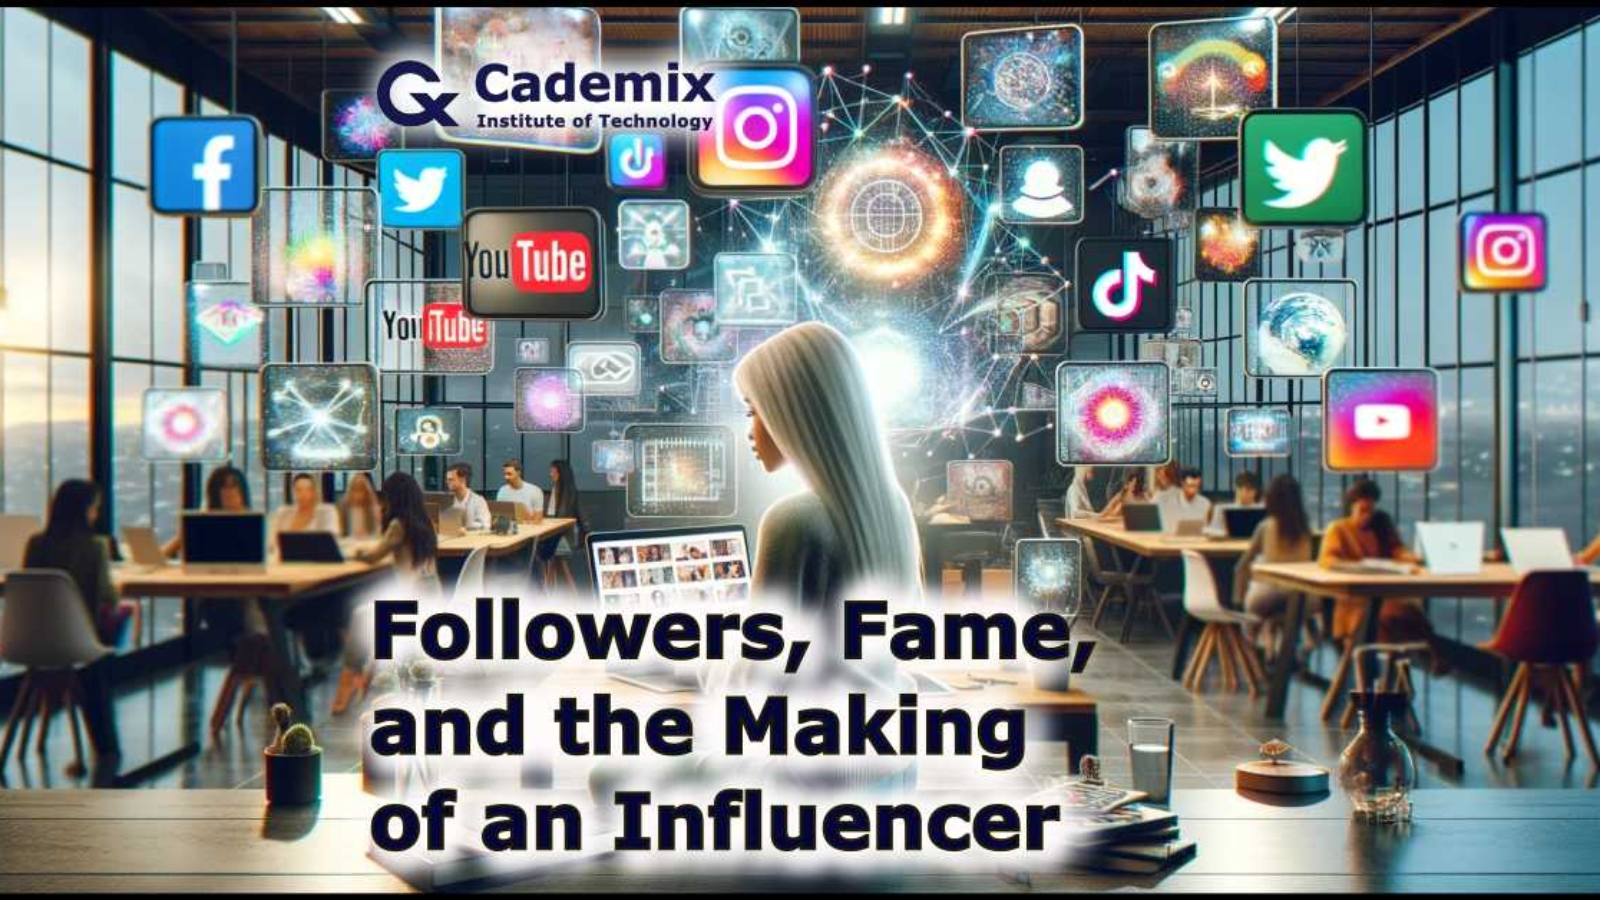 The scene is set in a modern co-working space, with a middle-eastern woman with blond hair engaging on different digital platforms, surrounded by screens displaying logos of Instagram, TikTok, and YouTube. By Samareh Ghaem Maghami, Cademix Magazine